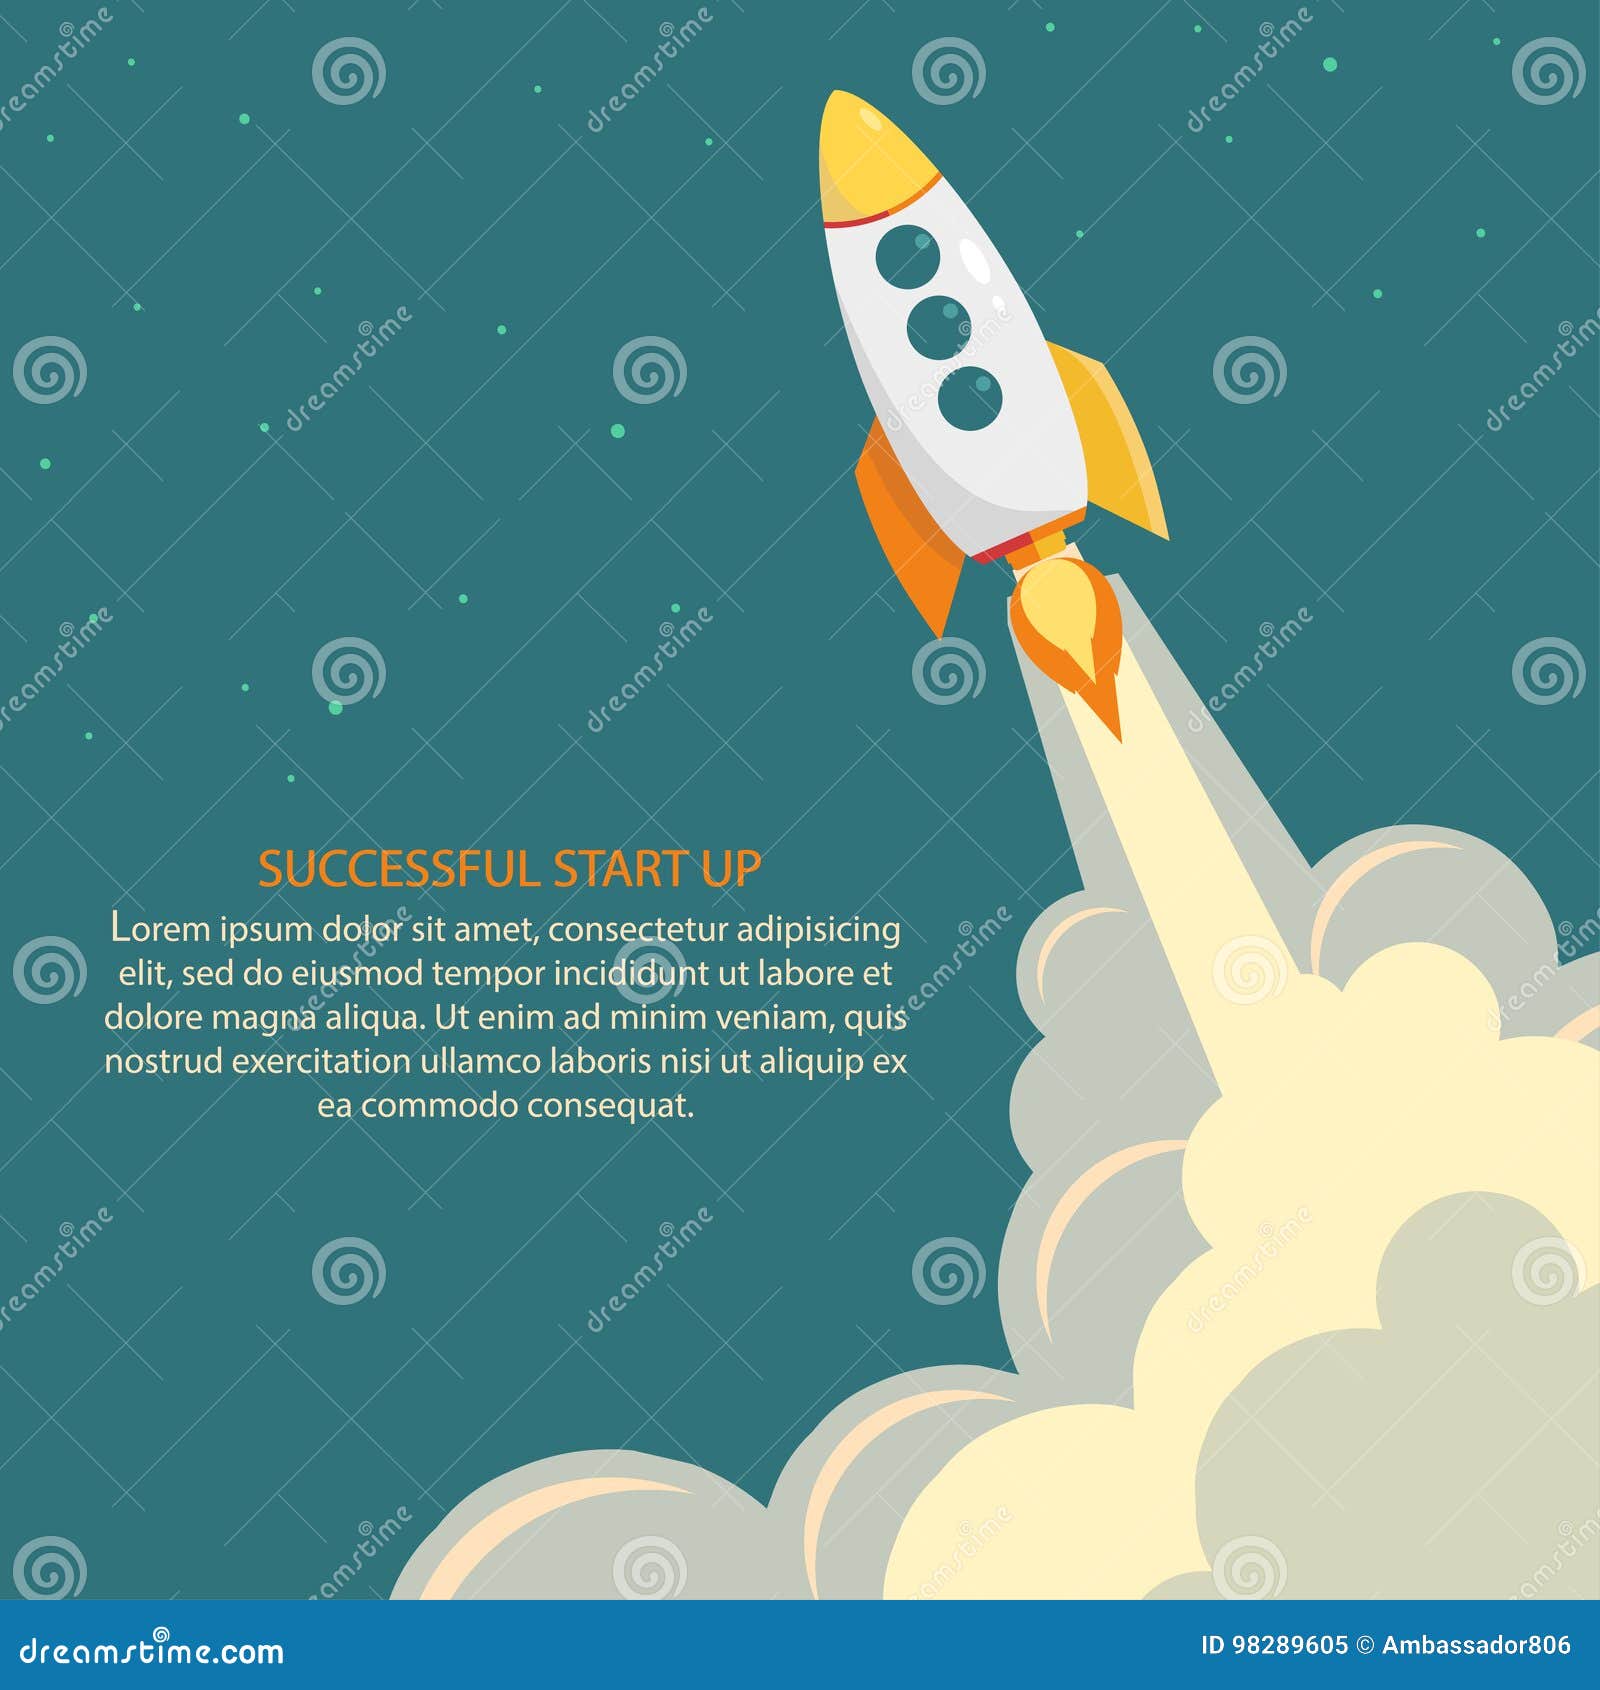 space rocket launch. start up